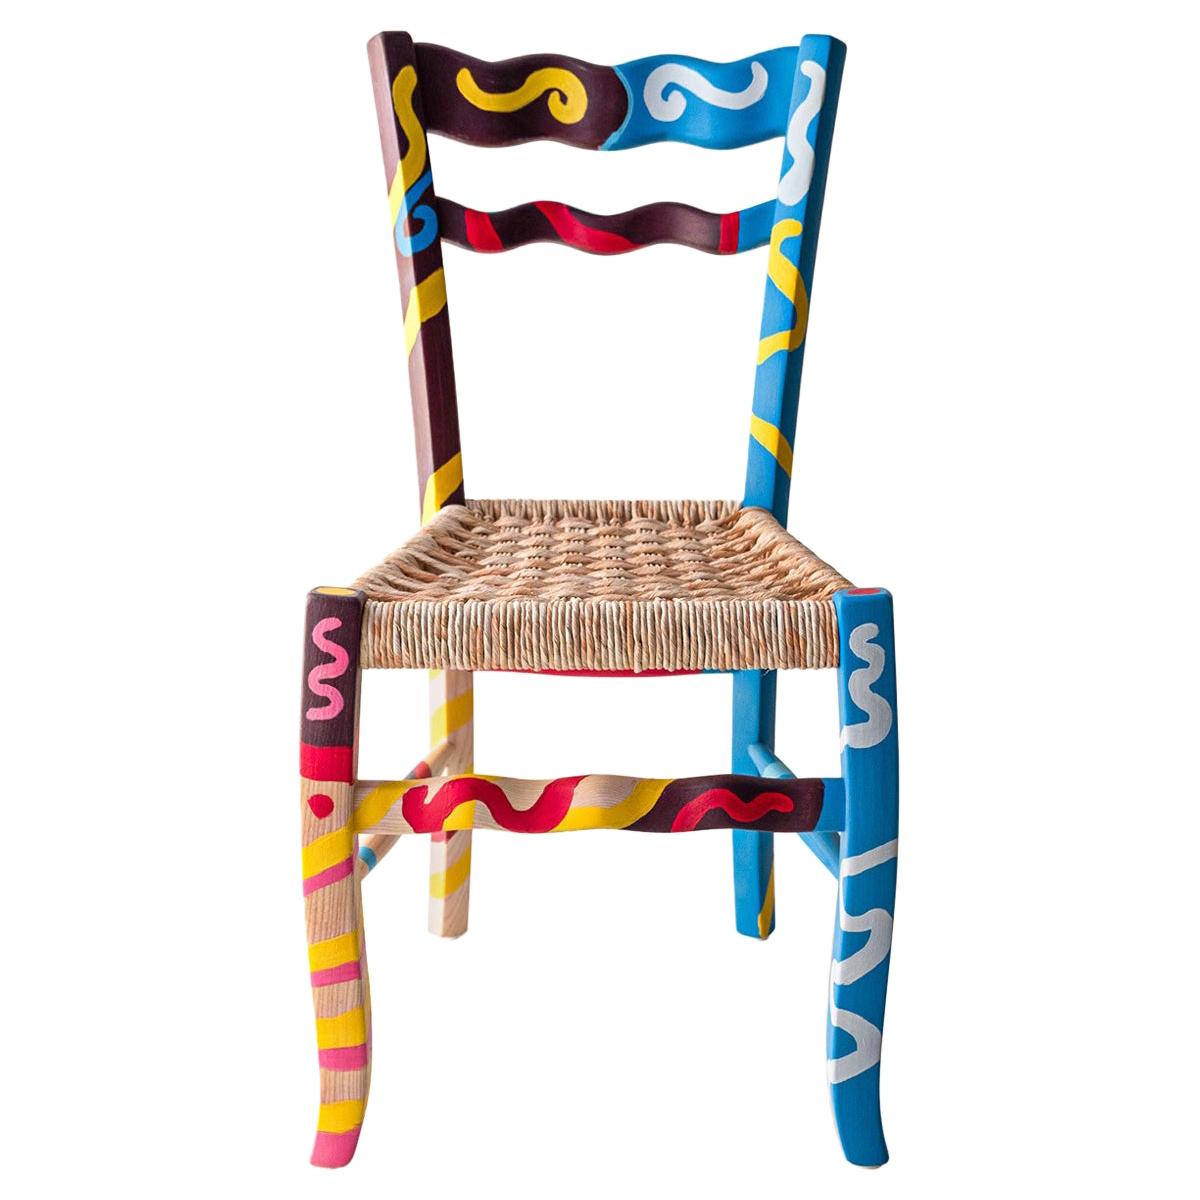 Italian Hand Painted Ashwood Chair "A signurina - Sciacca" by MYOP For Sale